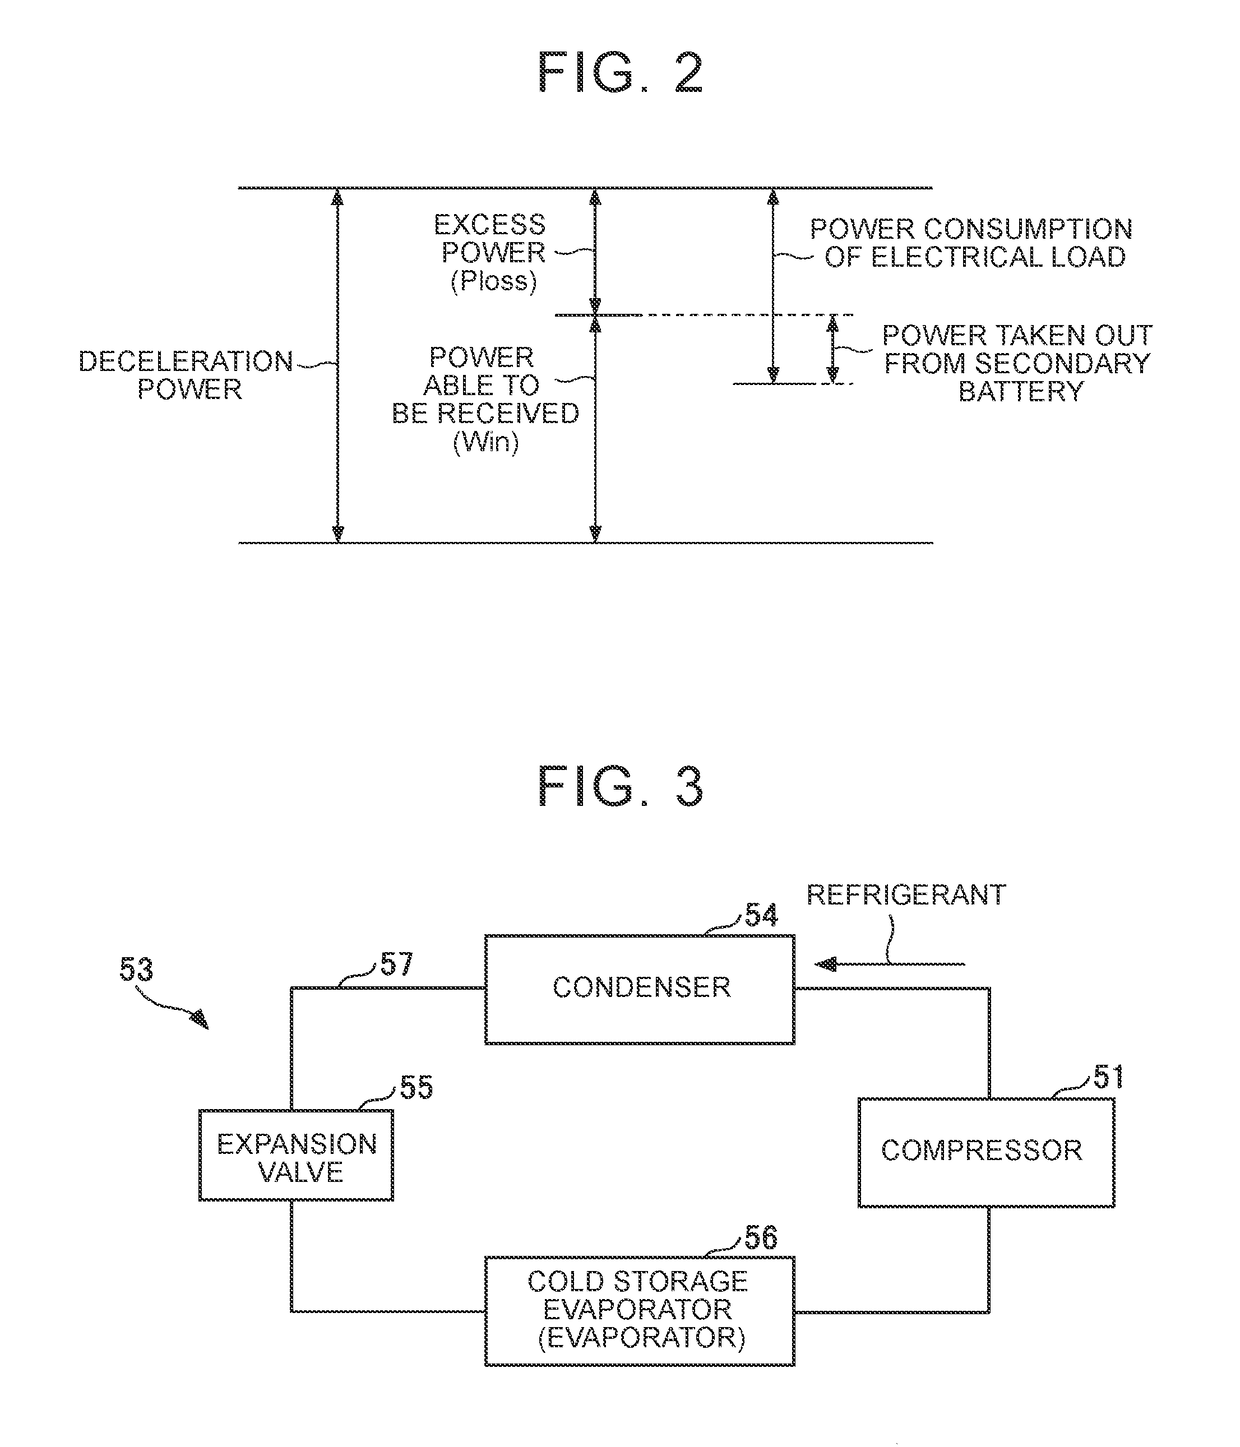 Control system for vehicle